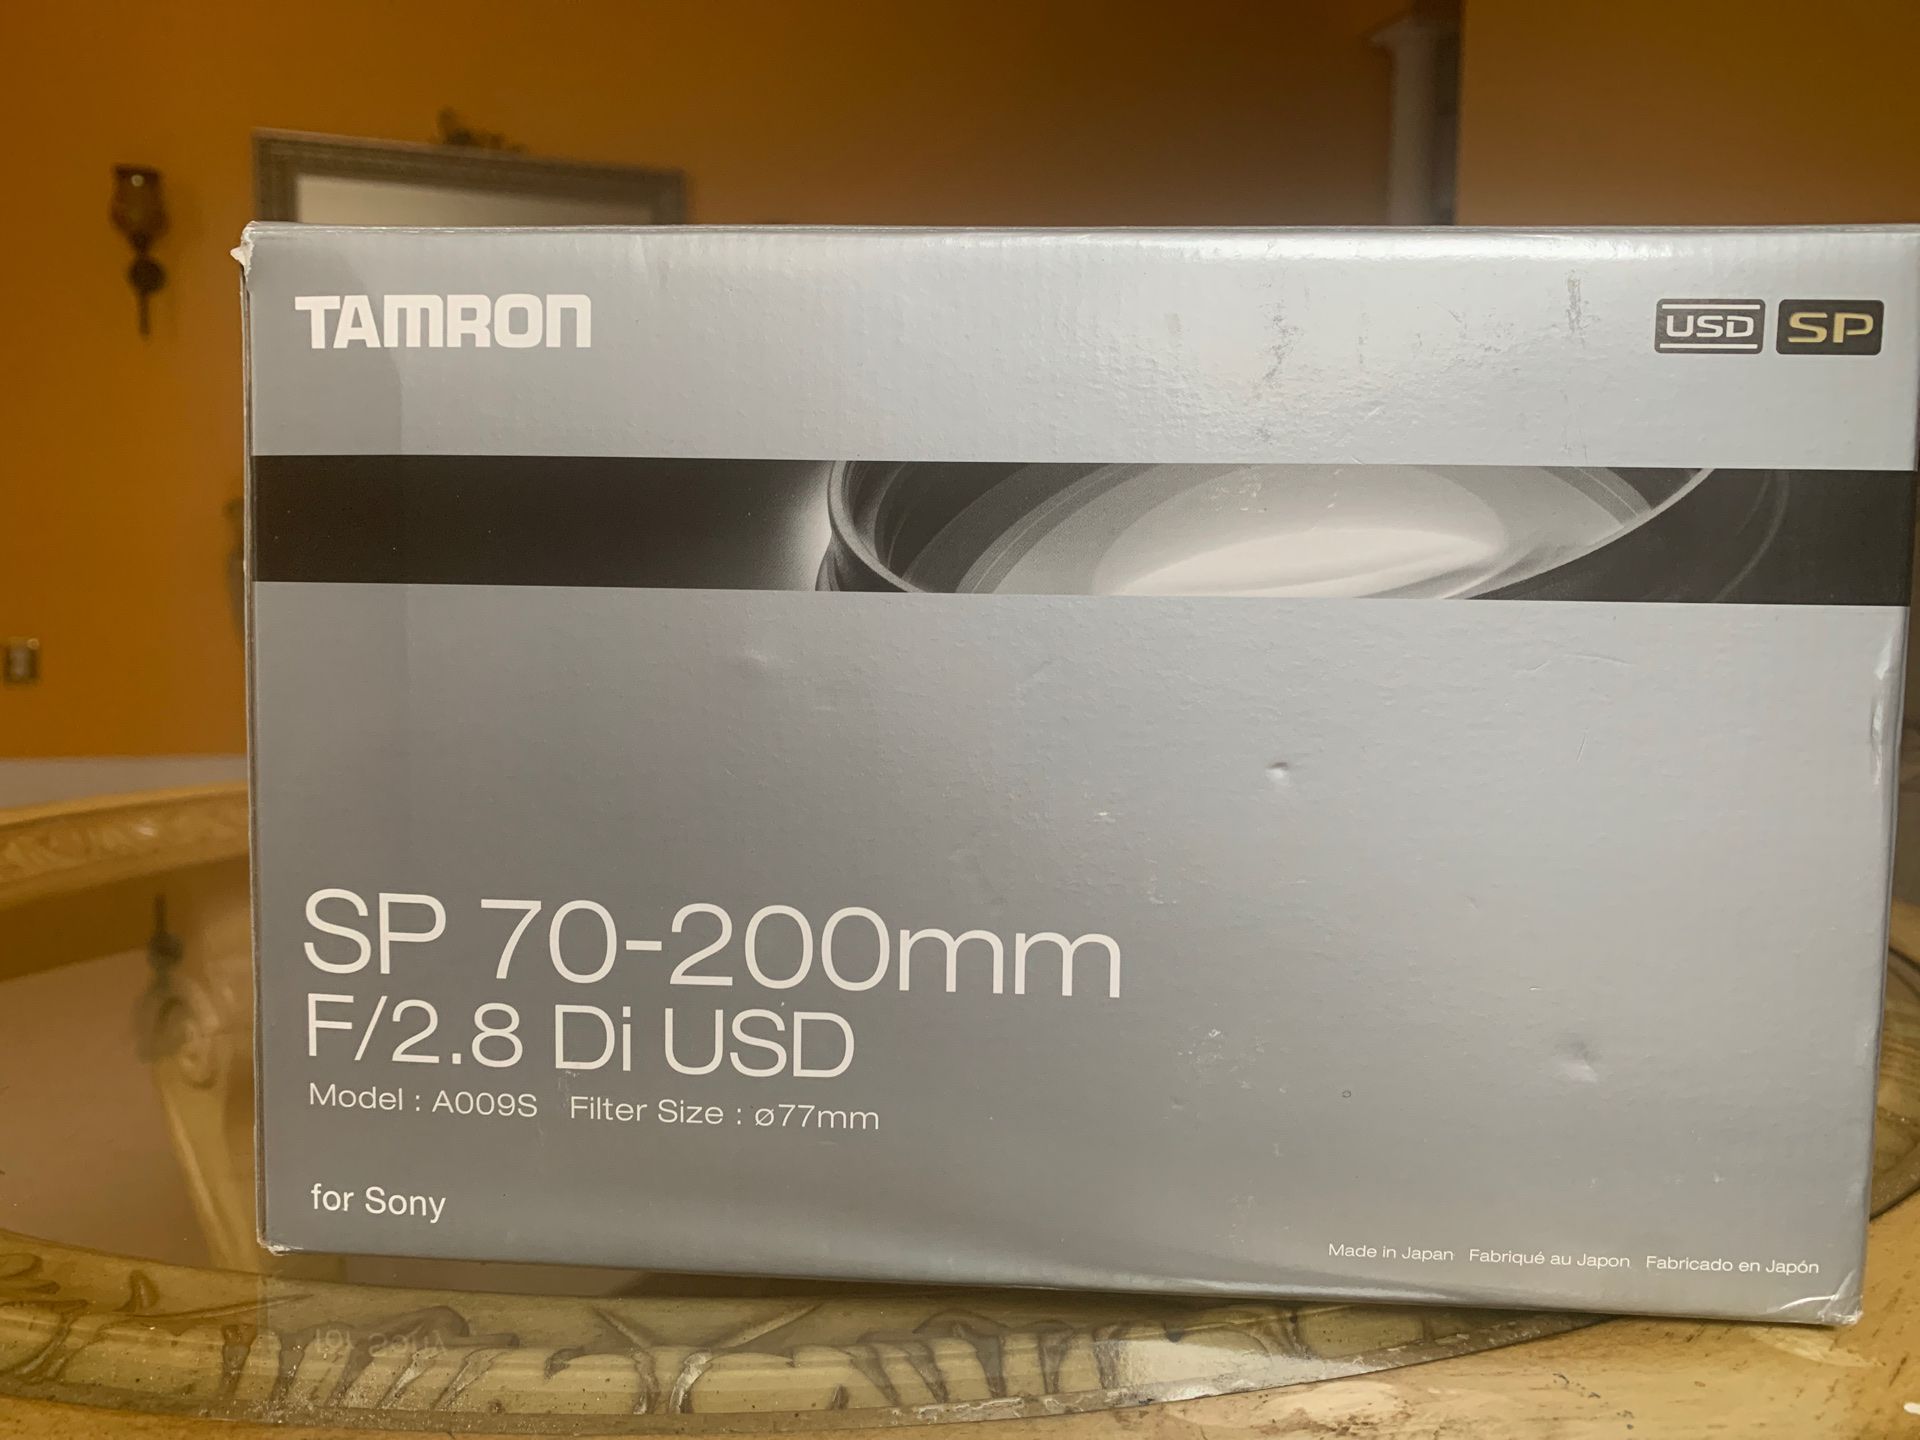 Sp 70-200mm Tamron model A009S filter size 77mm for Sony cameras